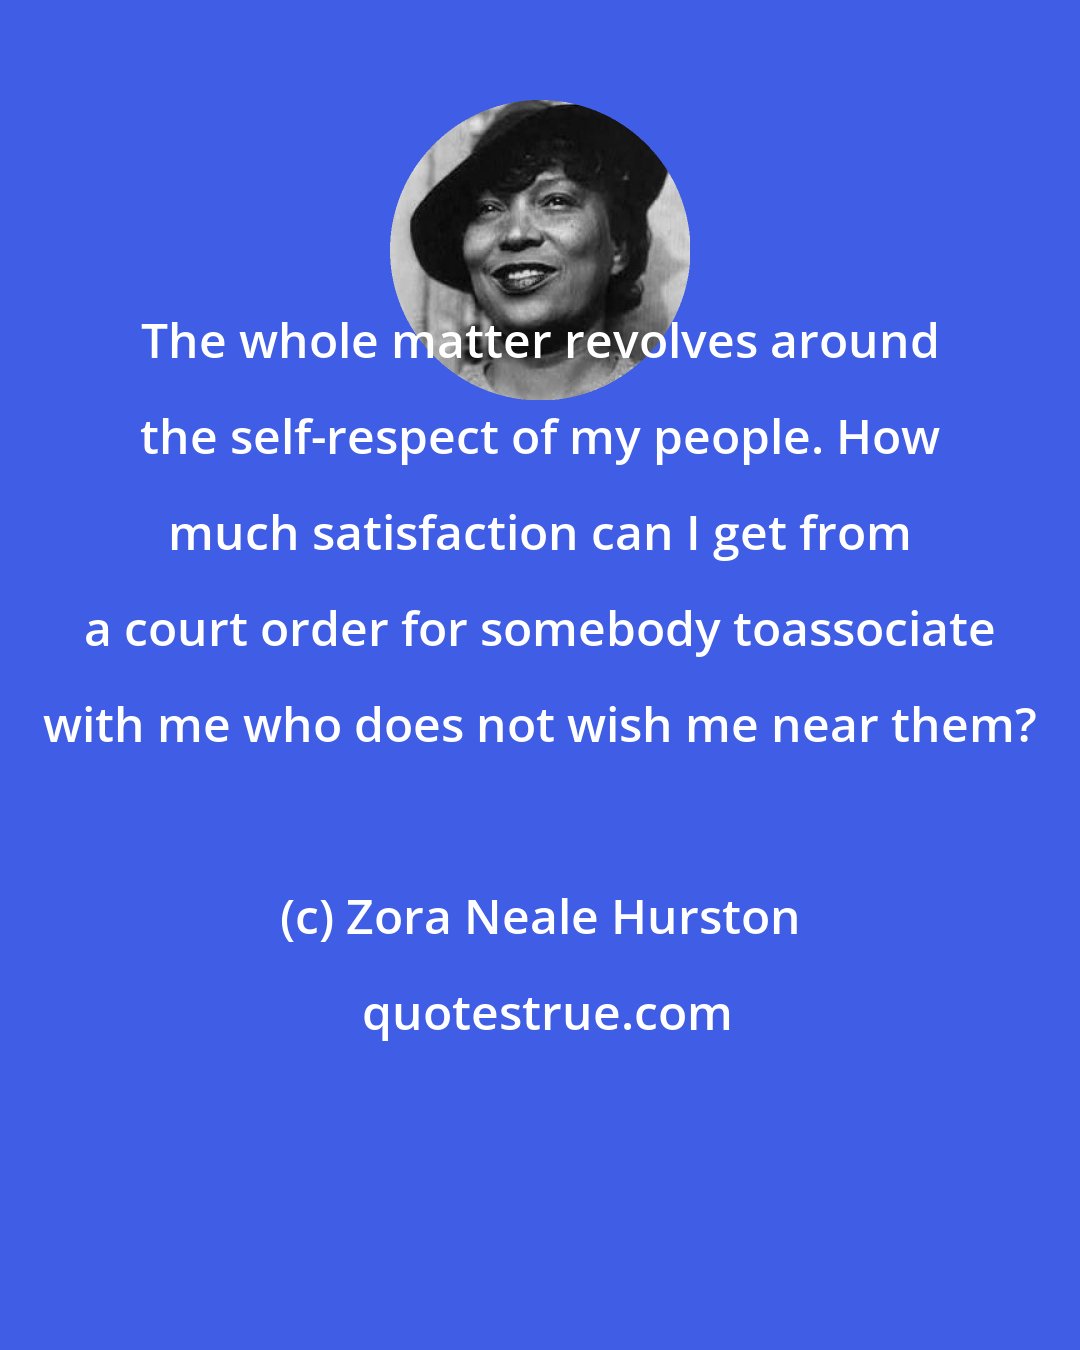 Zora Neale Hurston: The whole matter revolves around the self-respect of my people. How much satisfaction can I get from a court order for somebody toassociate with me who does not wish me near them?